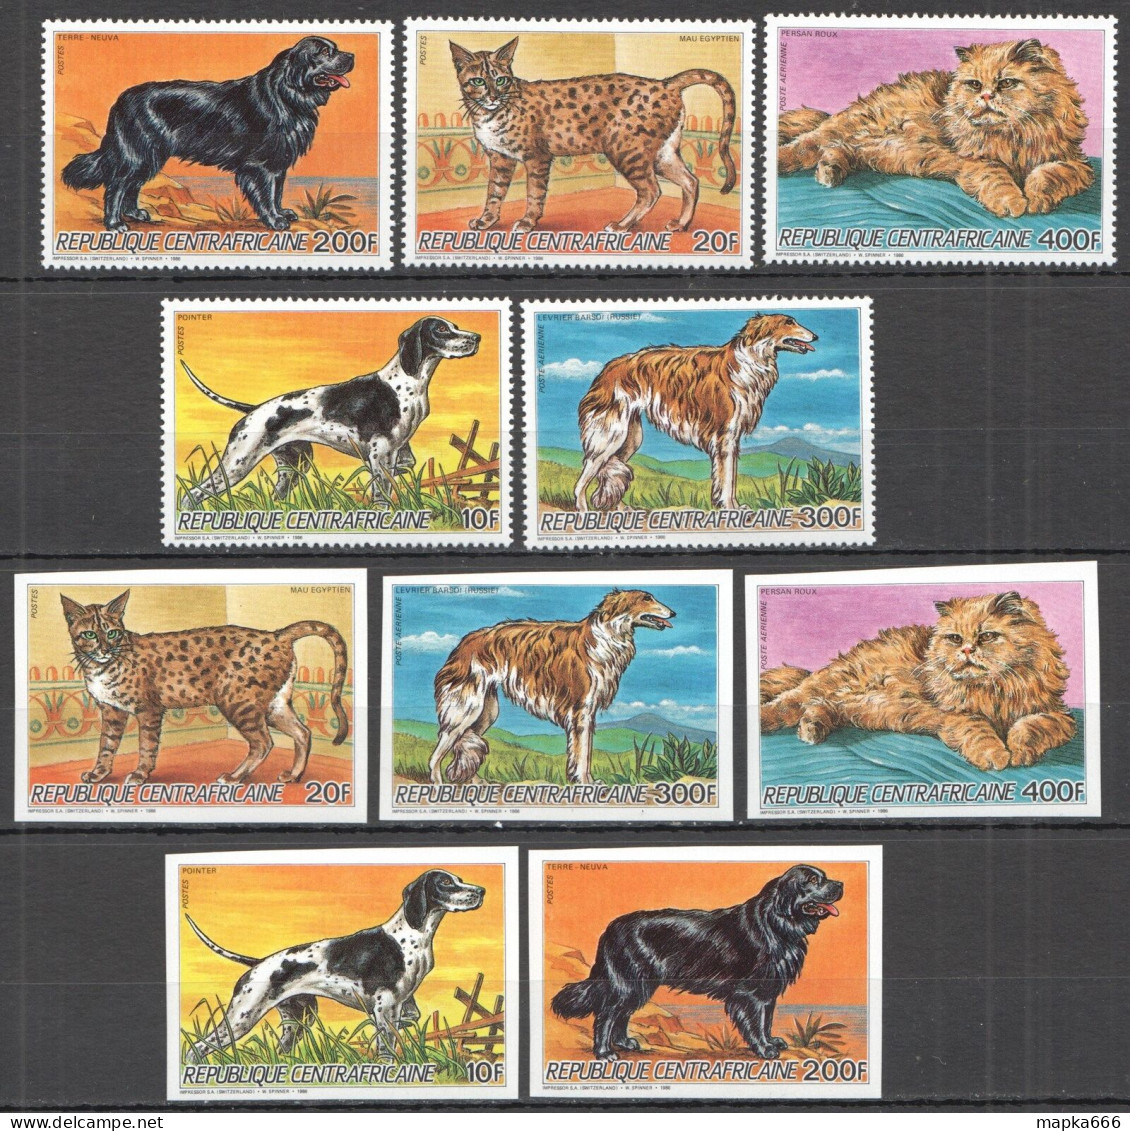 B1522 Imperf,Perf 1986 Central Africa Animals Pets Cats & Dogs #(1227-31)A+B Mnh - Gatti